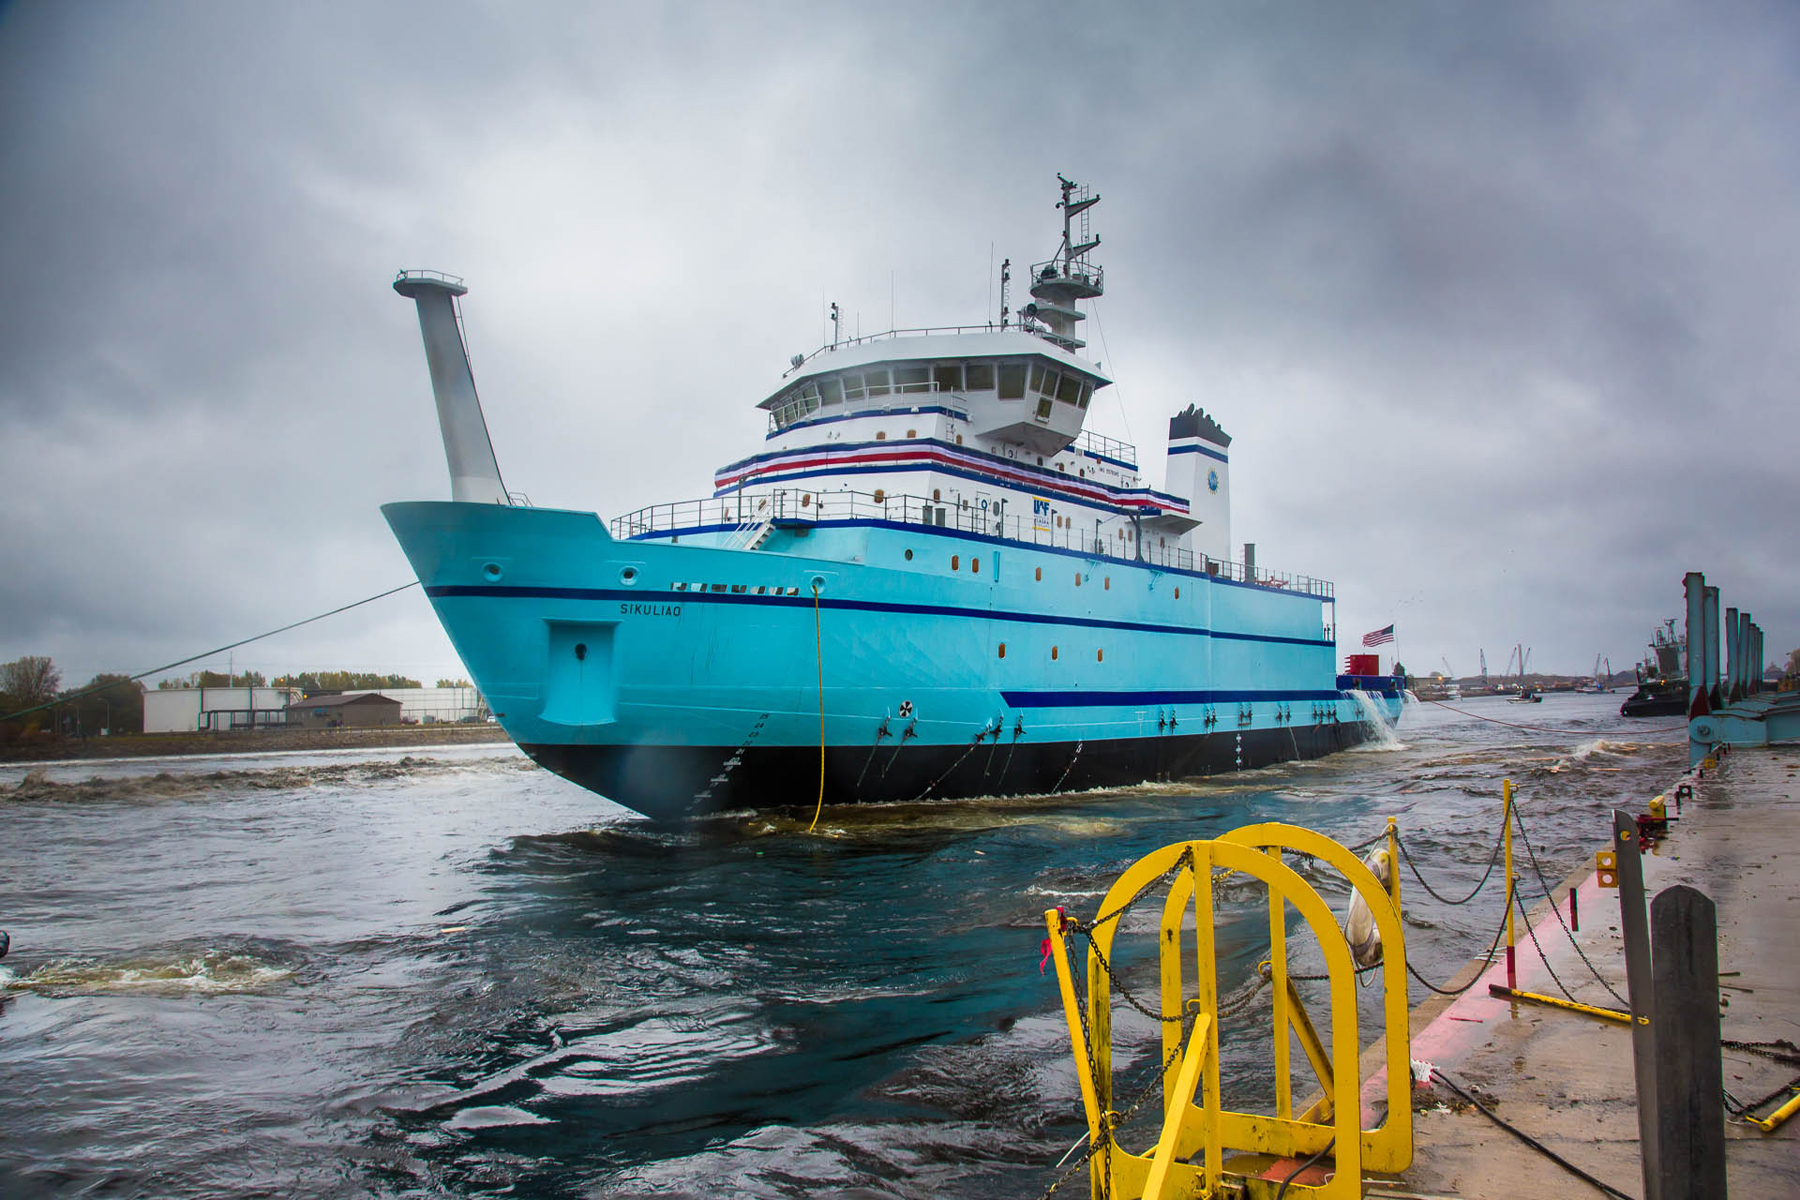  UAF photo by Todd Paris. The 261-foot Sikuliaq rests in the water moments after its launch from a shipyard in Marinette, Wis.